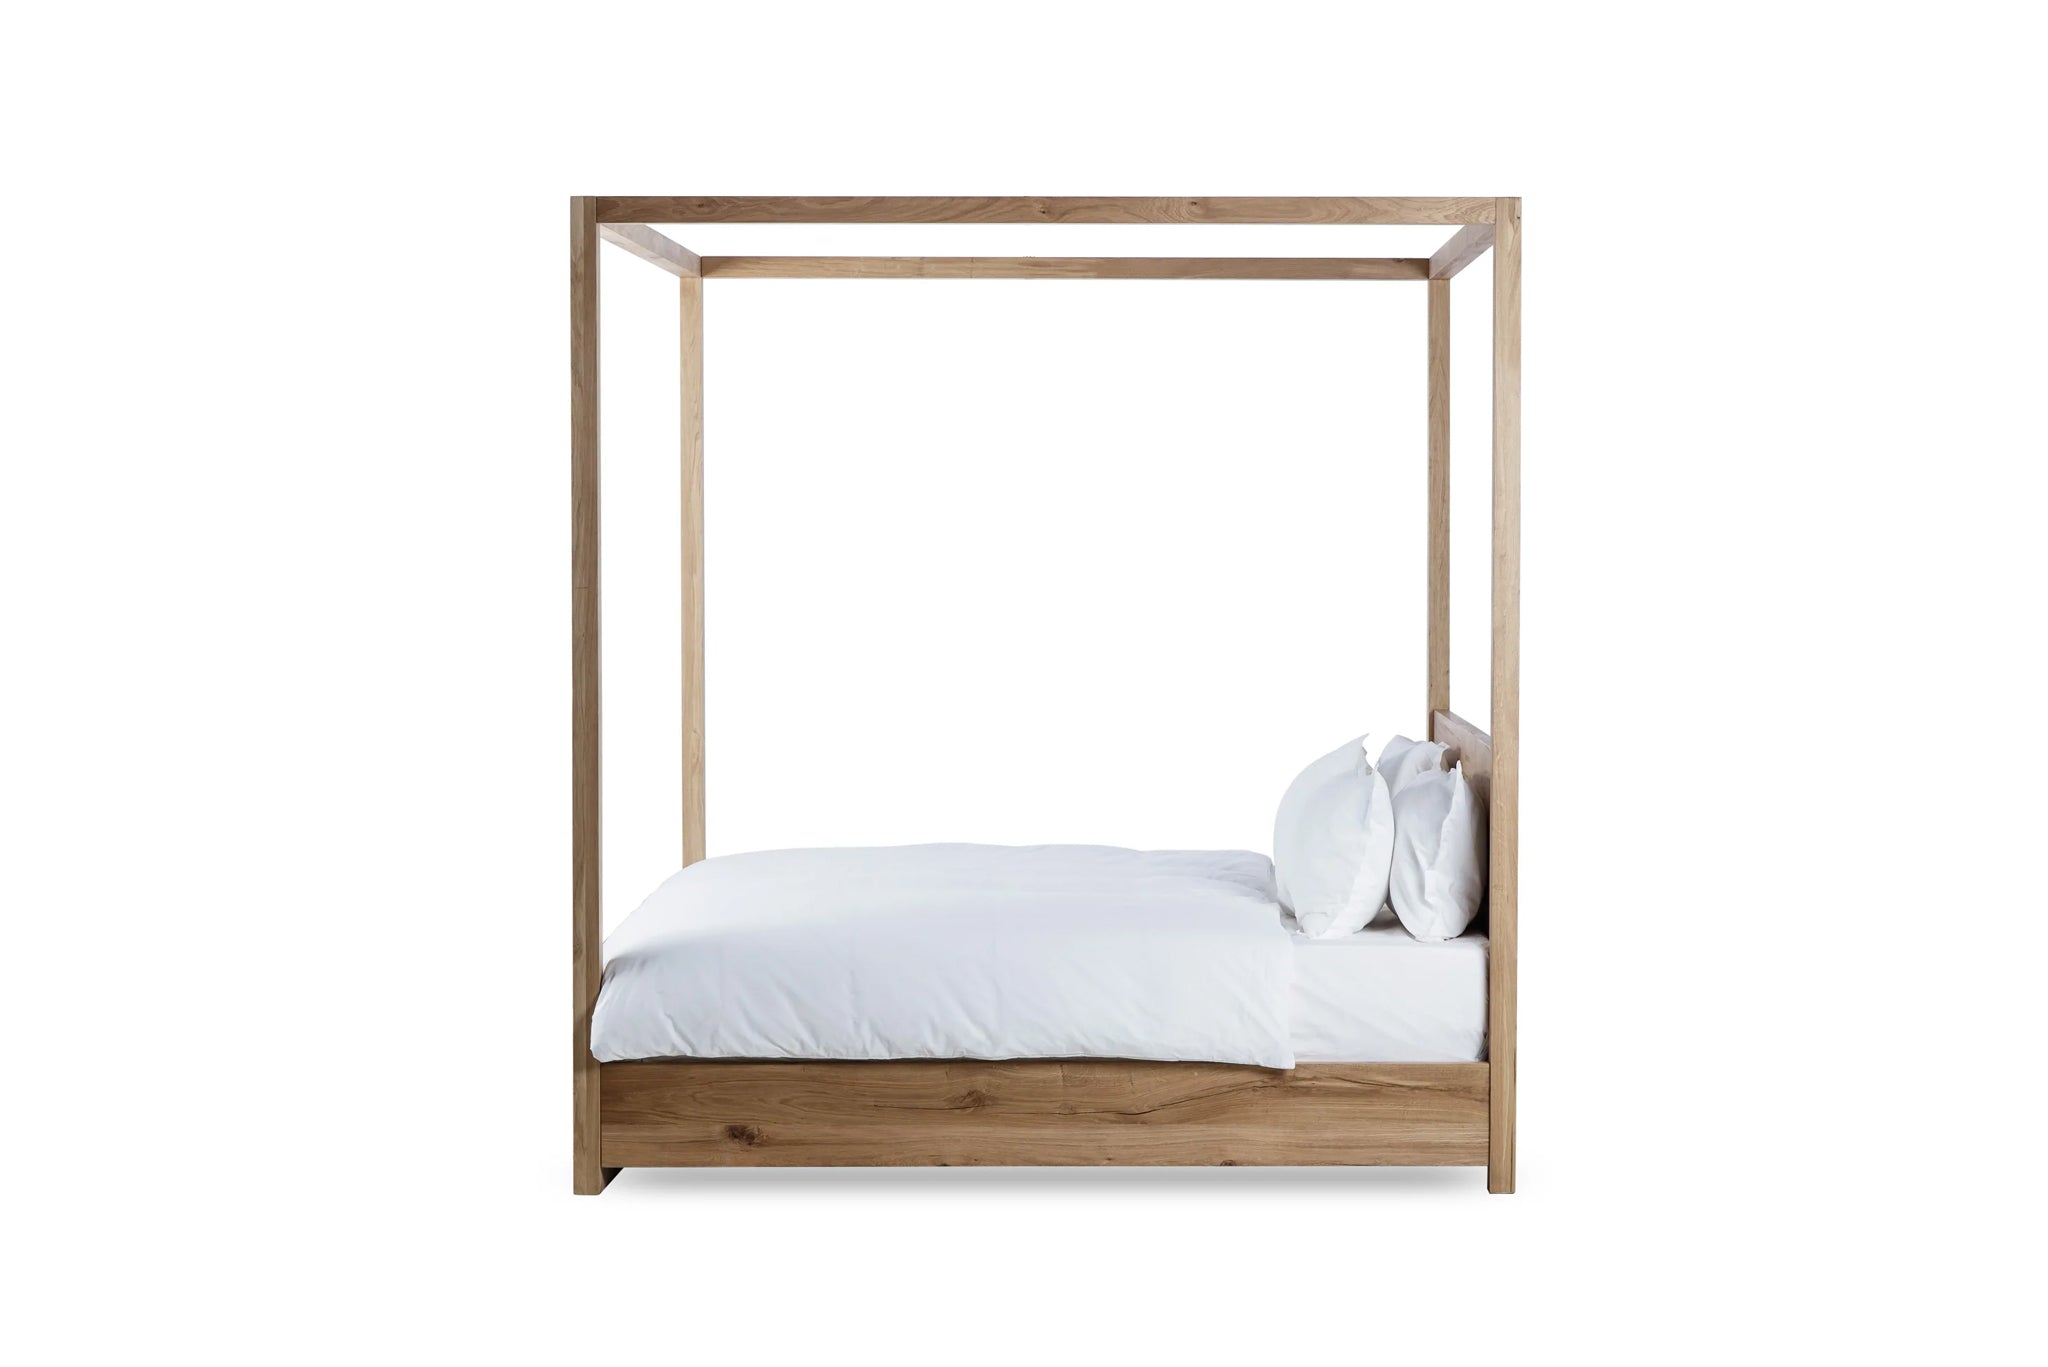 Arlo Reclaimed French Oak 4 Poster Bed – King